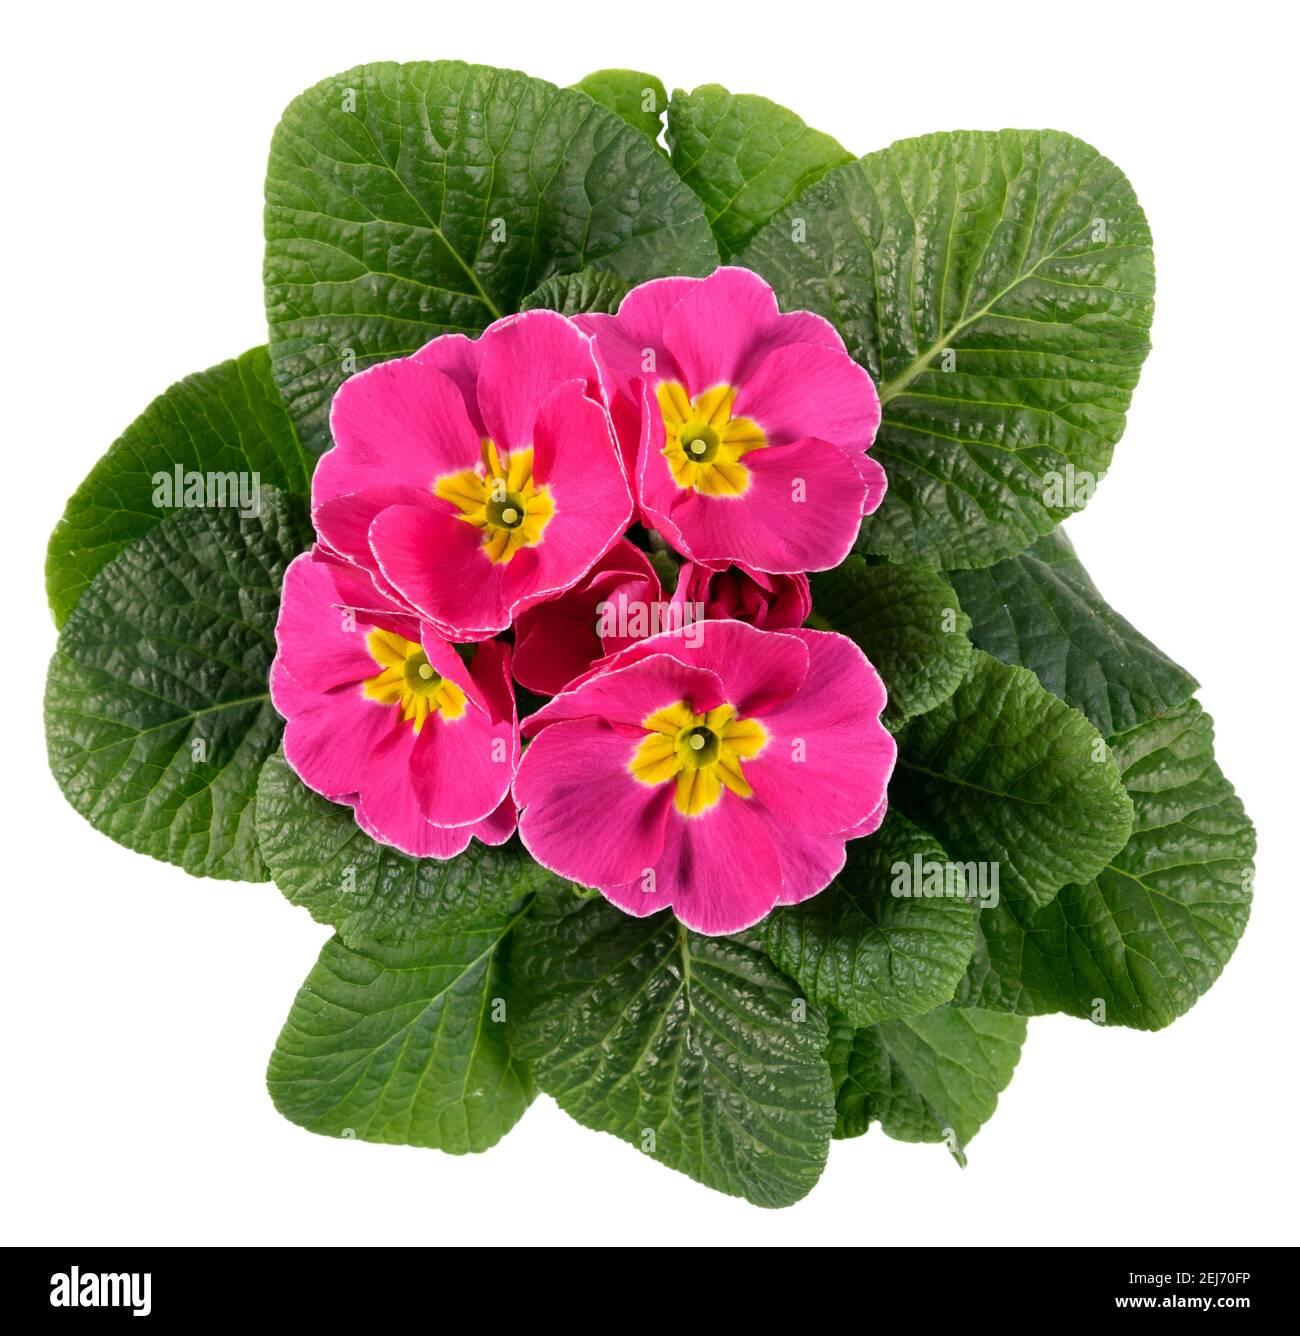 Top down view on a flowering variegated pink and yellow Primrose or Primula with fresh dark green leaves isolated on white for seasonal spring and sum Stock Photo